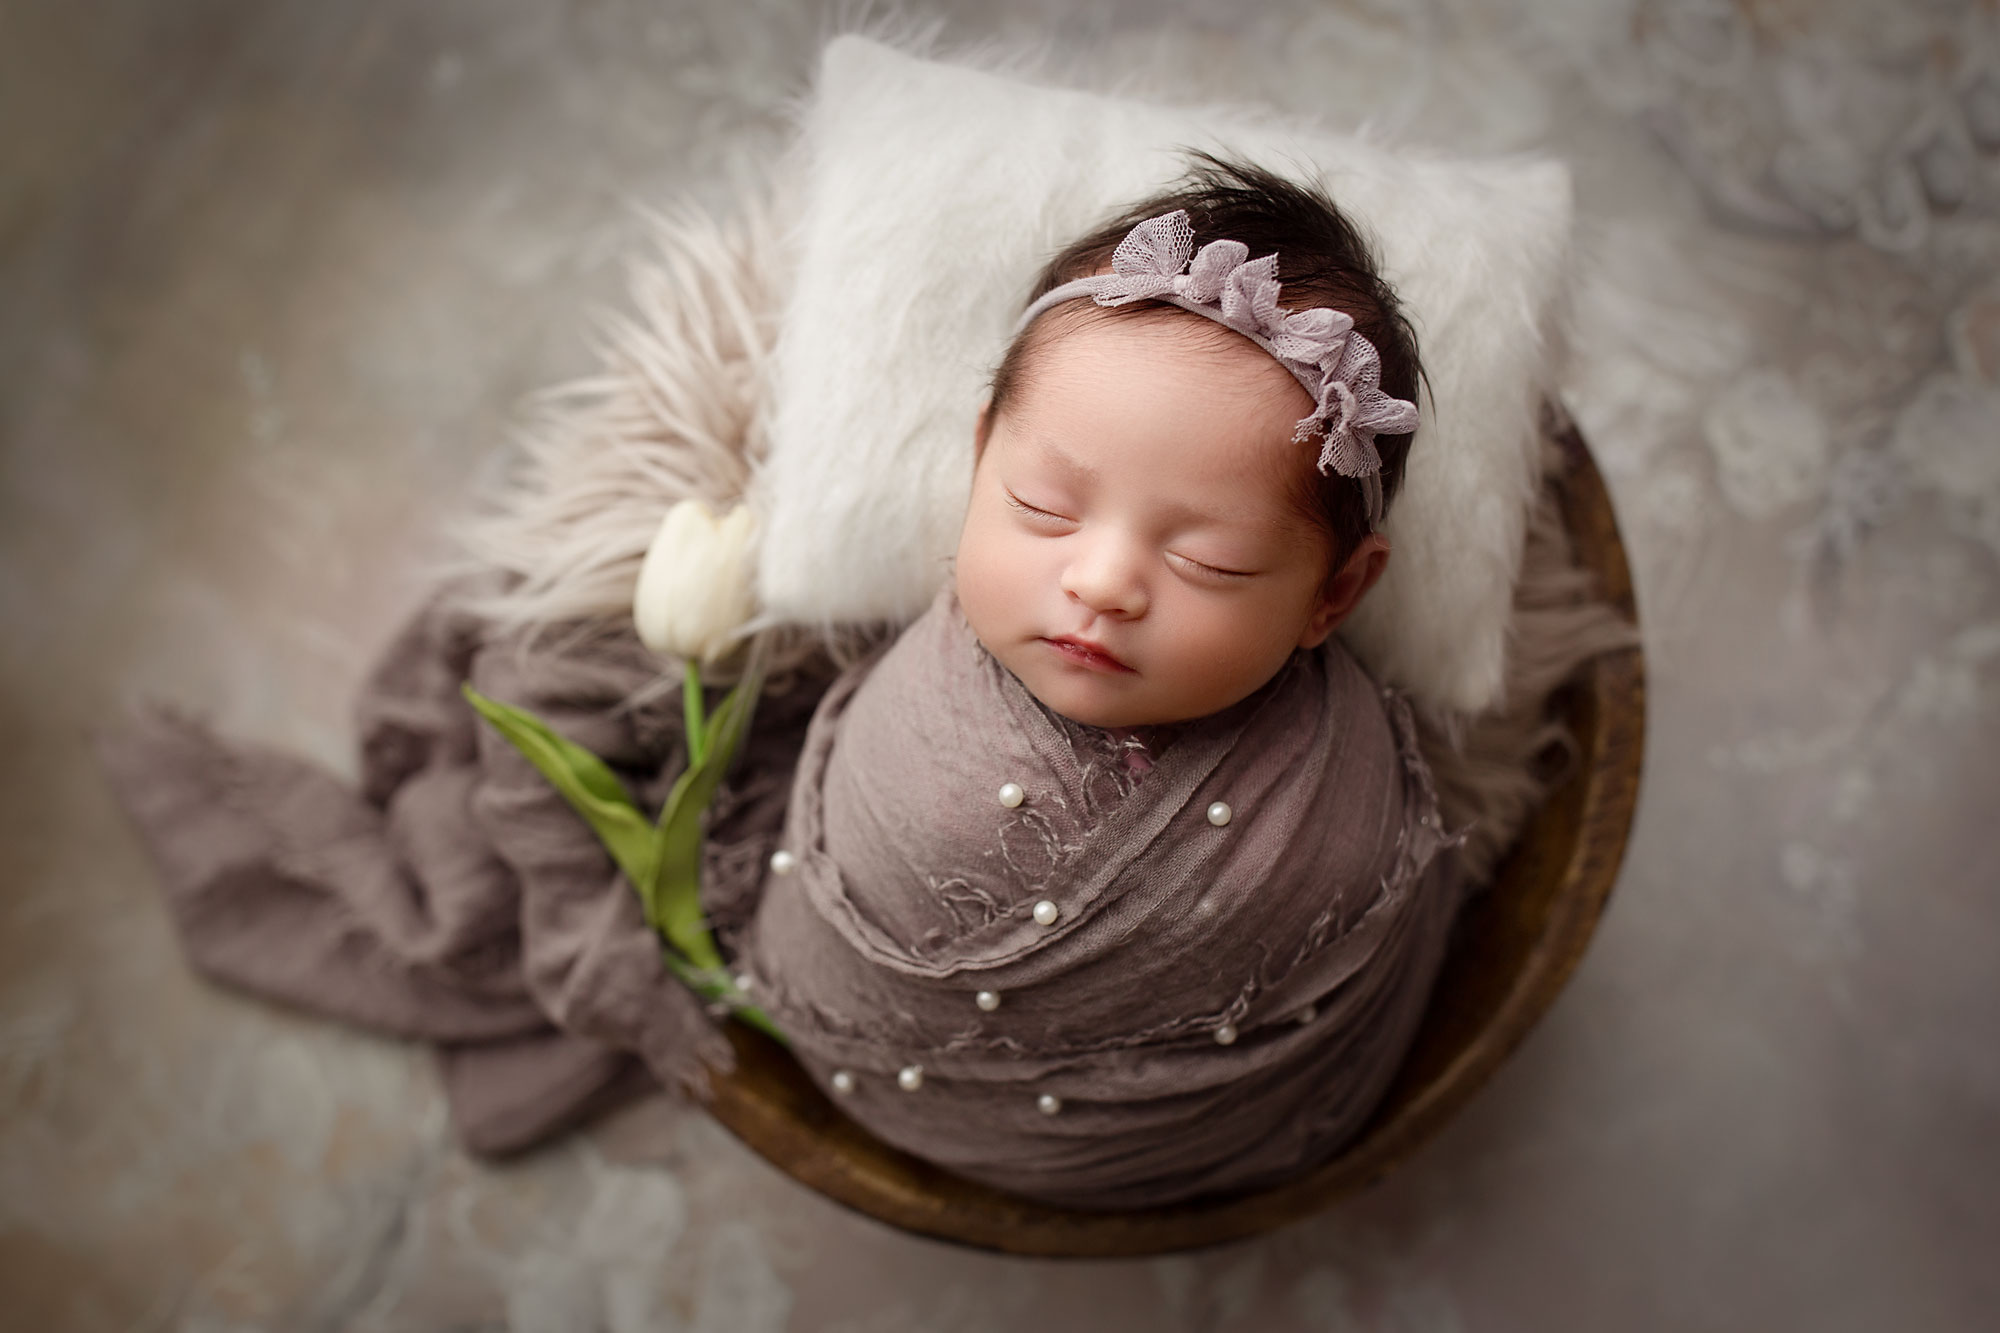 baby girl sleeping on a blanket NJ newborn photography What is the best age for newborn photos